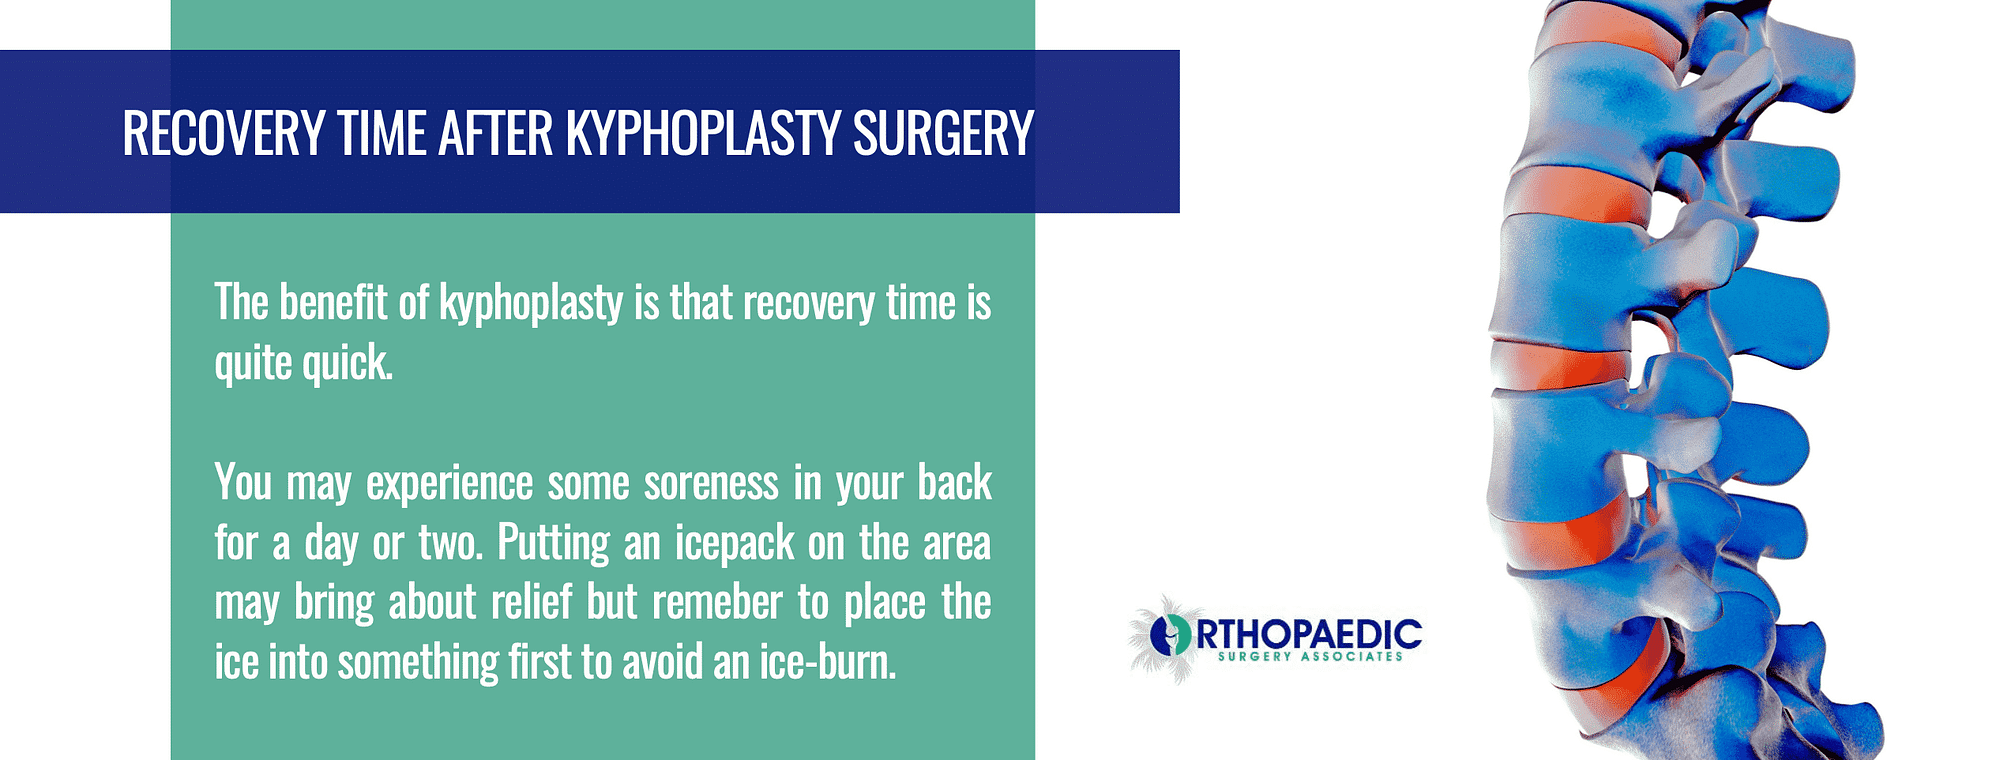 How long does it take to recover from kyphoplasty?